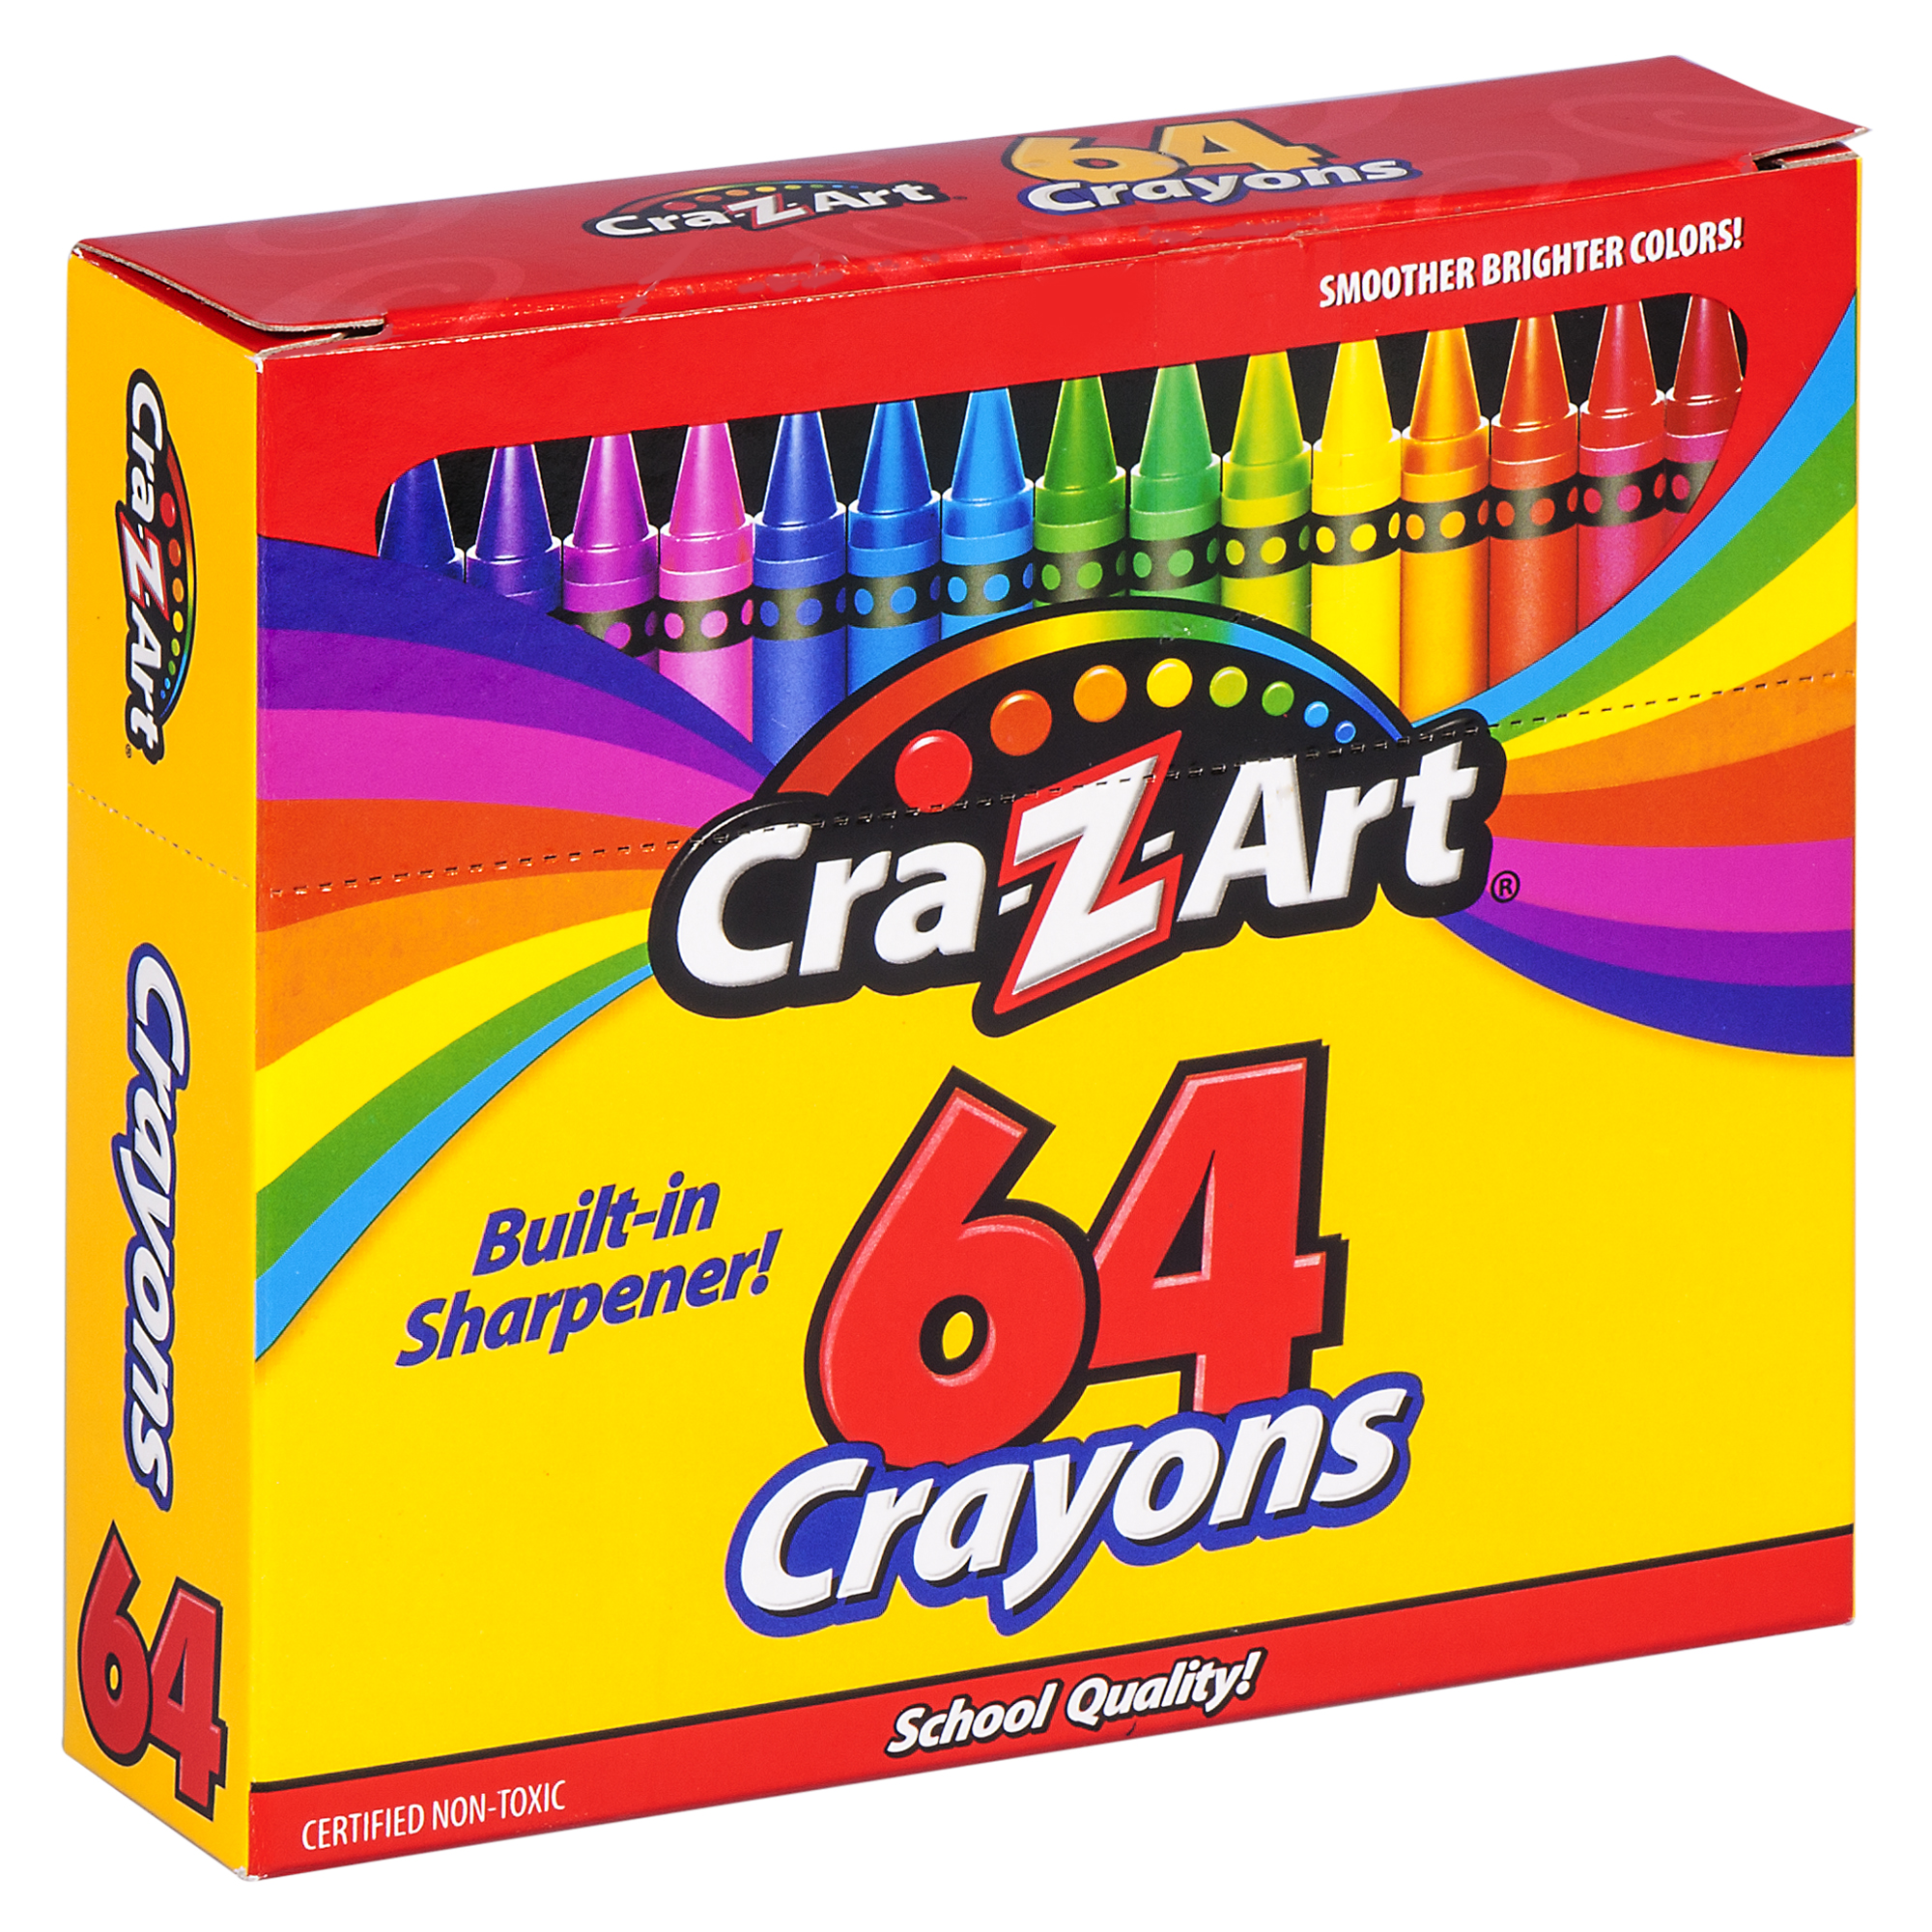 Cra-Z-Art Classic Crayons Multicolor Bulk Pack, 64 Count, Built-in Sharpener, Back to School - image 3 of 9